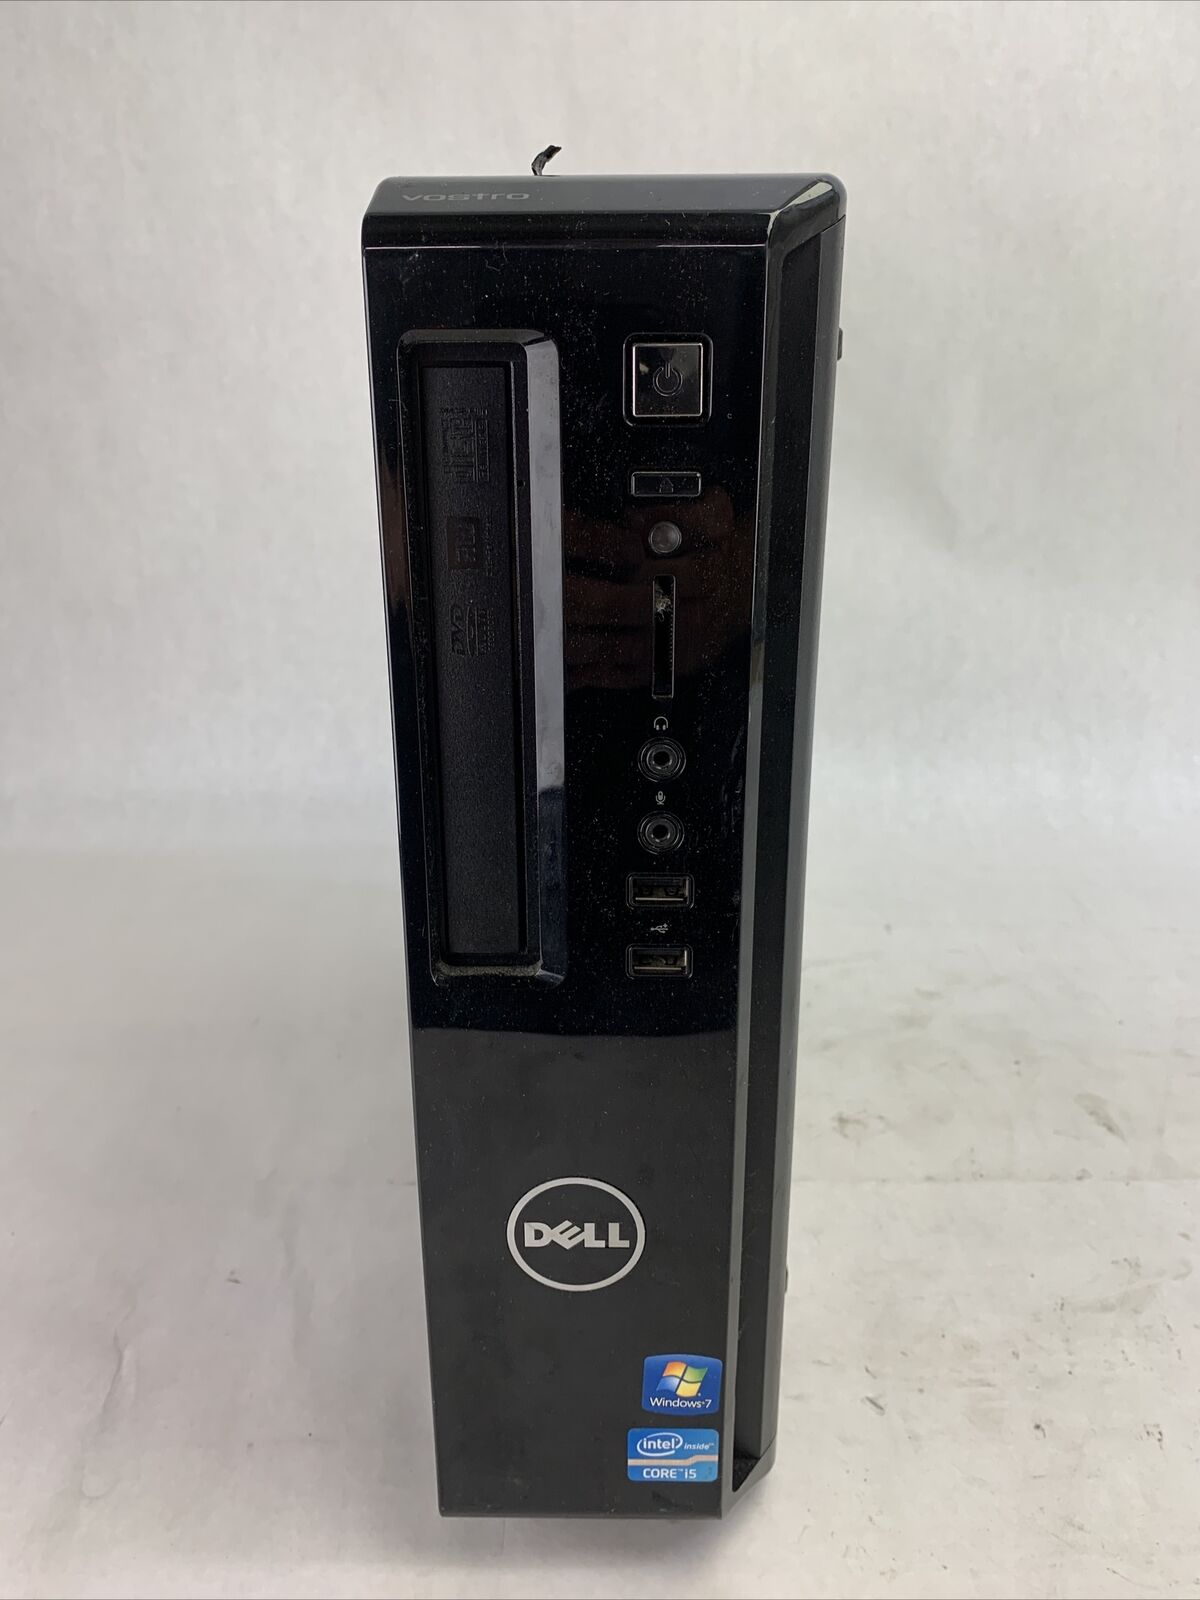 Dell Vostro 260s DT Intel Core i5-2400 3.1GHz 4GB RAM No HDD No OS